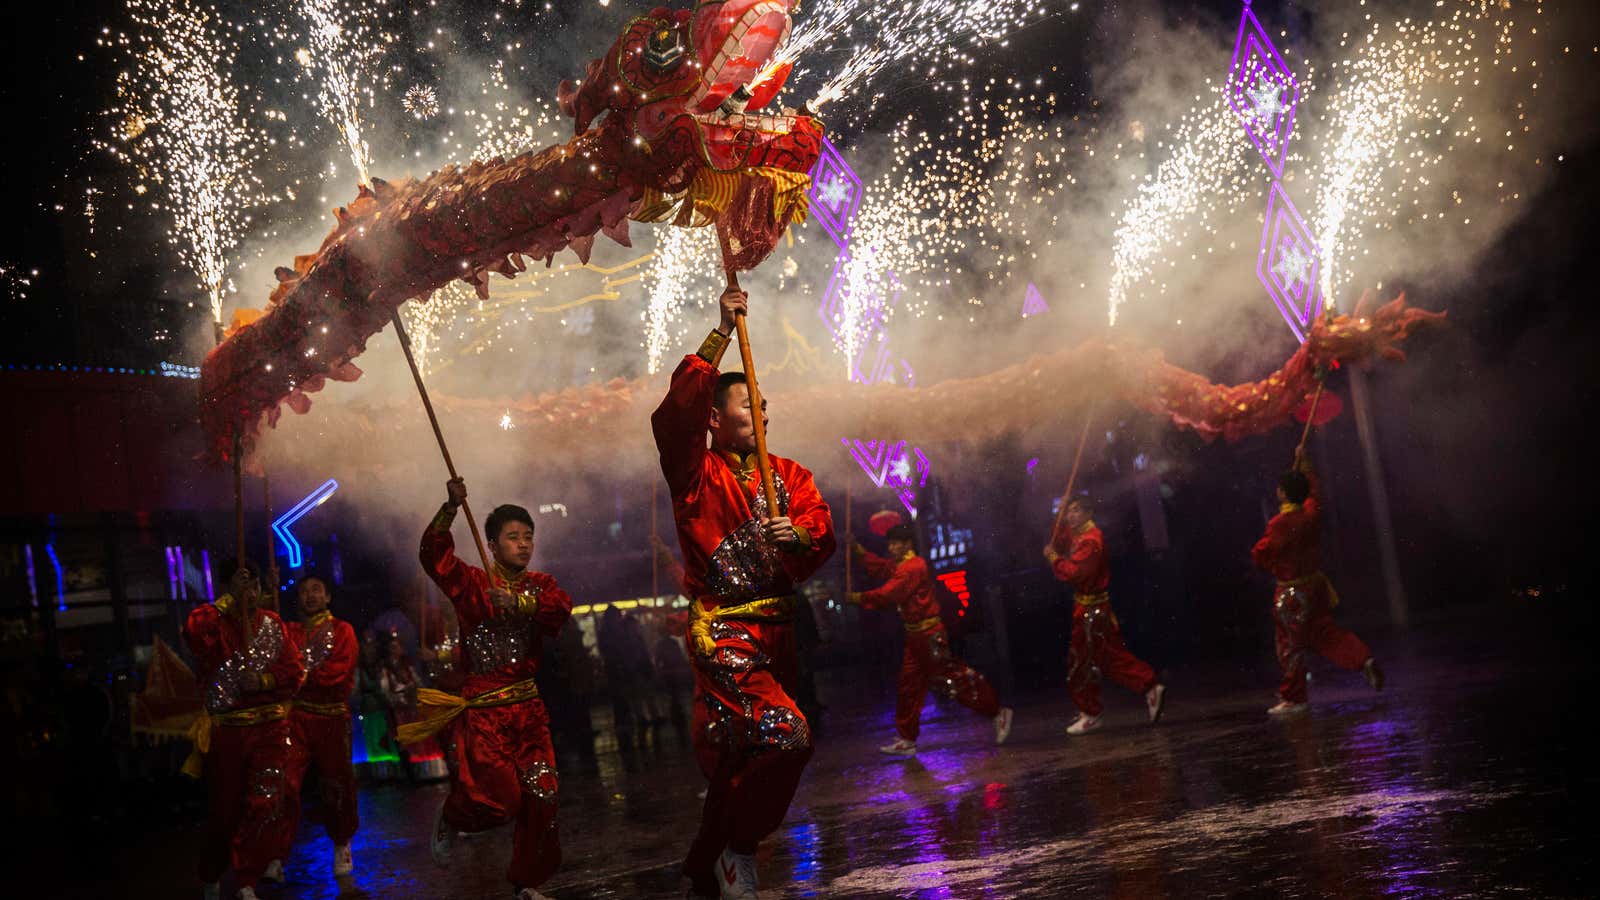 Chinese New Year in the US has taken a dip in popularity